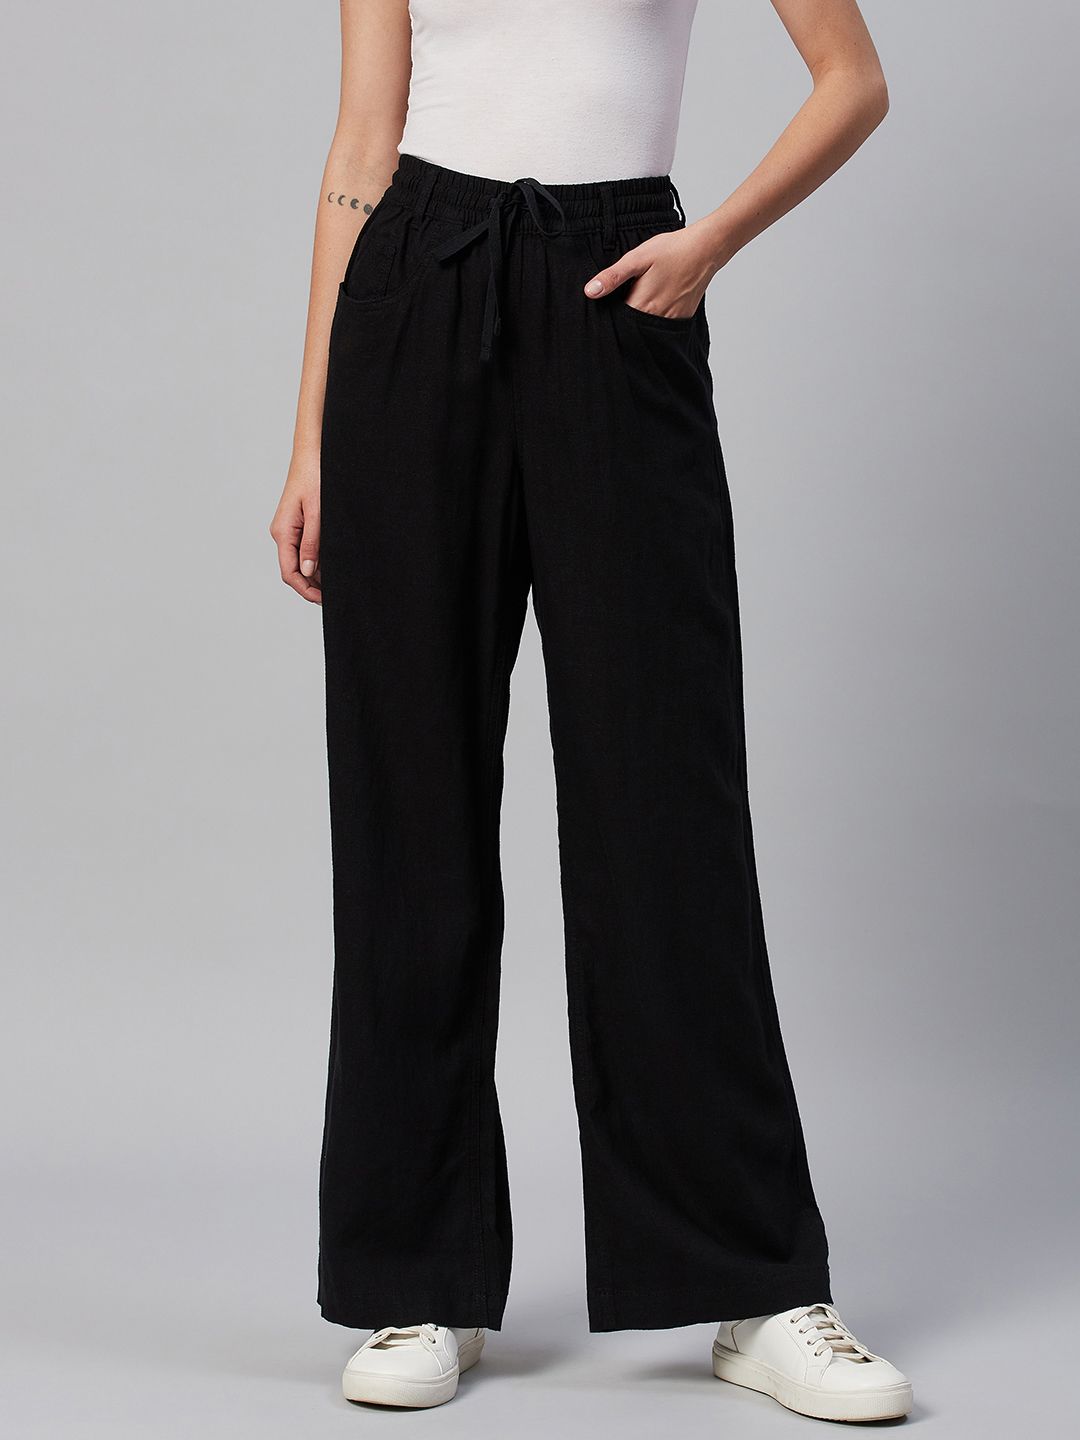 Marks & Spencer Women Black Trousers Price in India